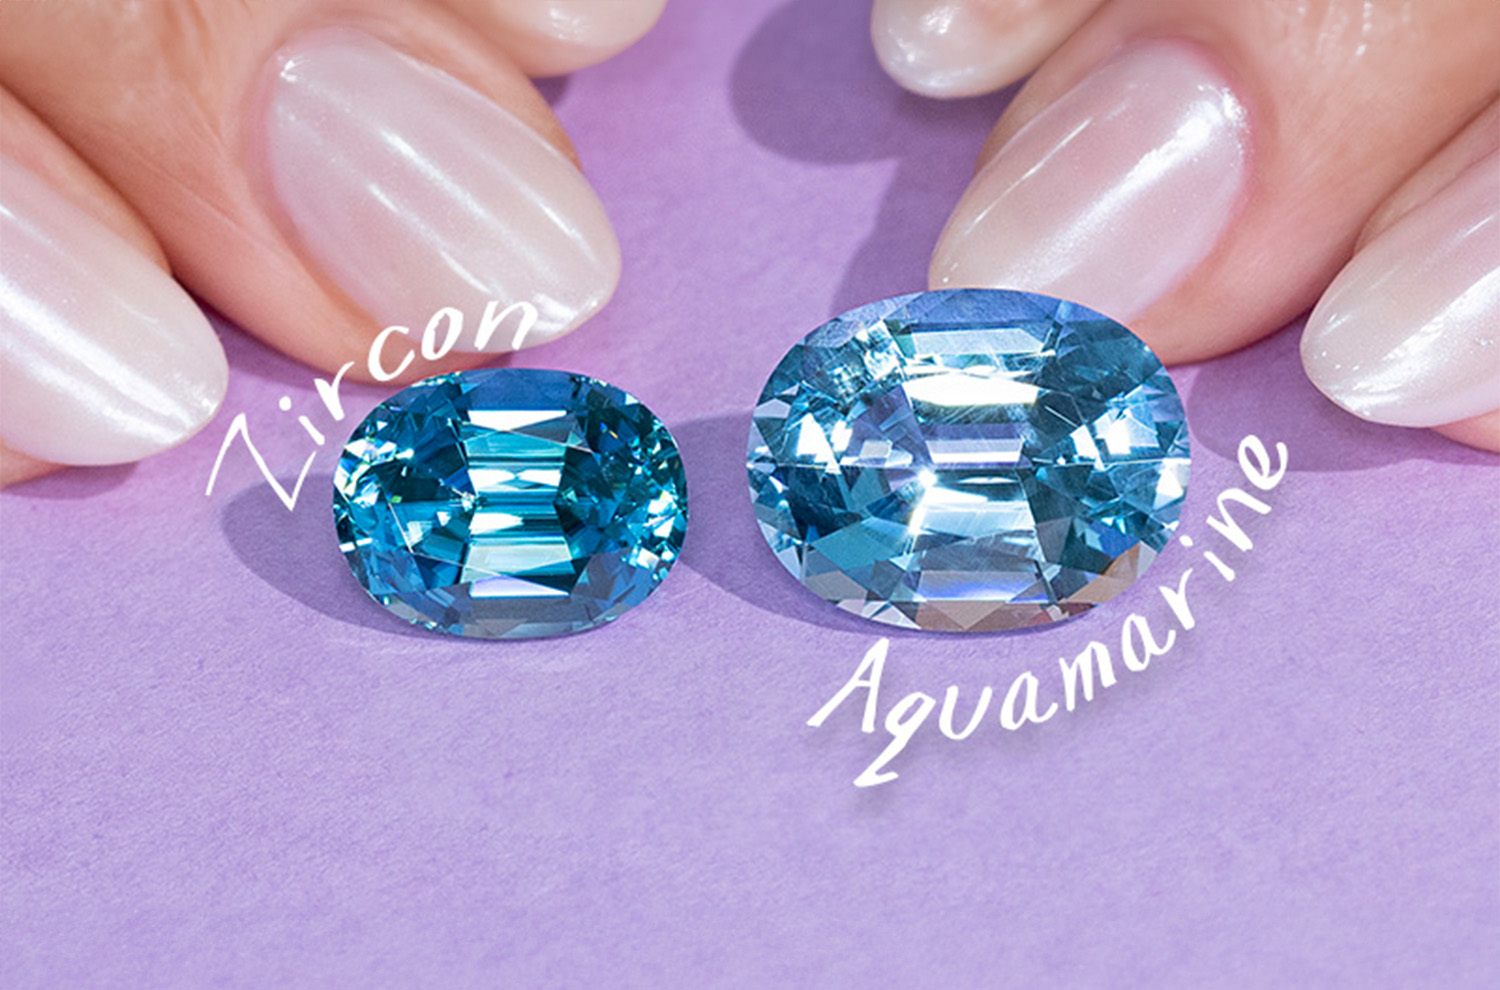 A 7.41 carat oval blue Zircon is next to a 7.41ct oval Aquamarine on a purple background. Even though they are the same carat weight, because of the differences in density, the Aquamarine appears much larger.